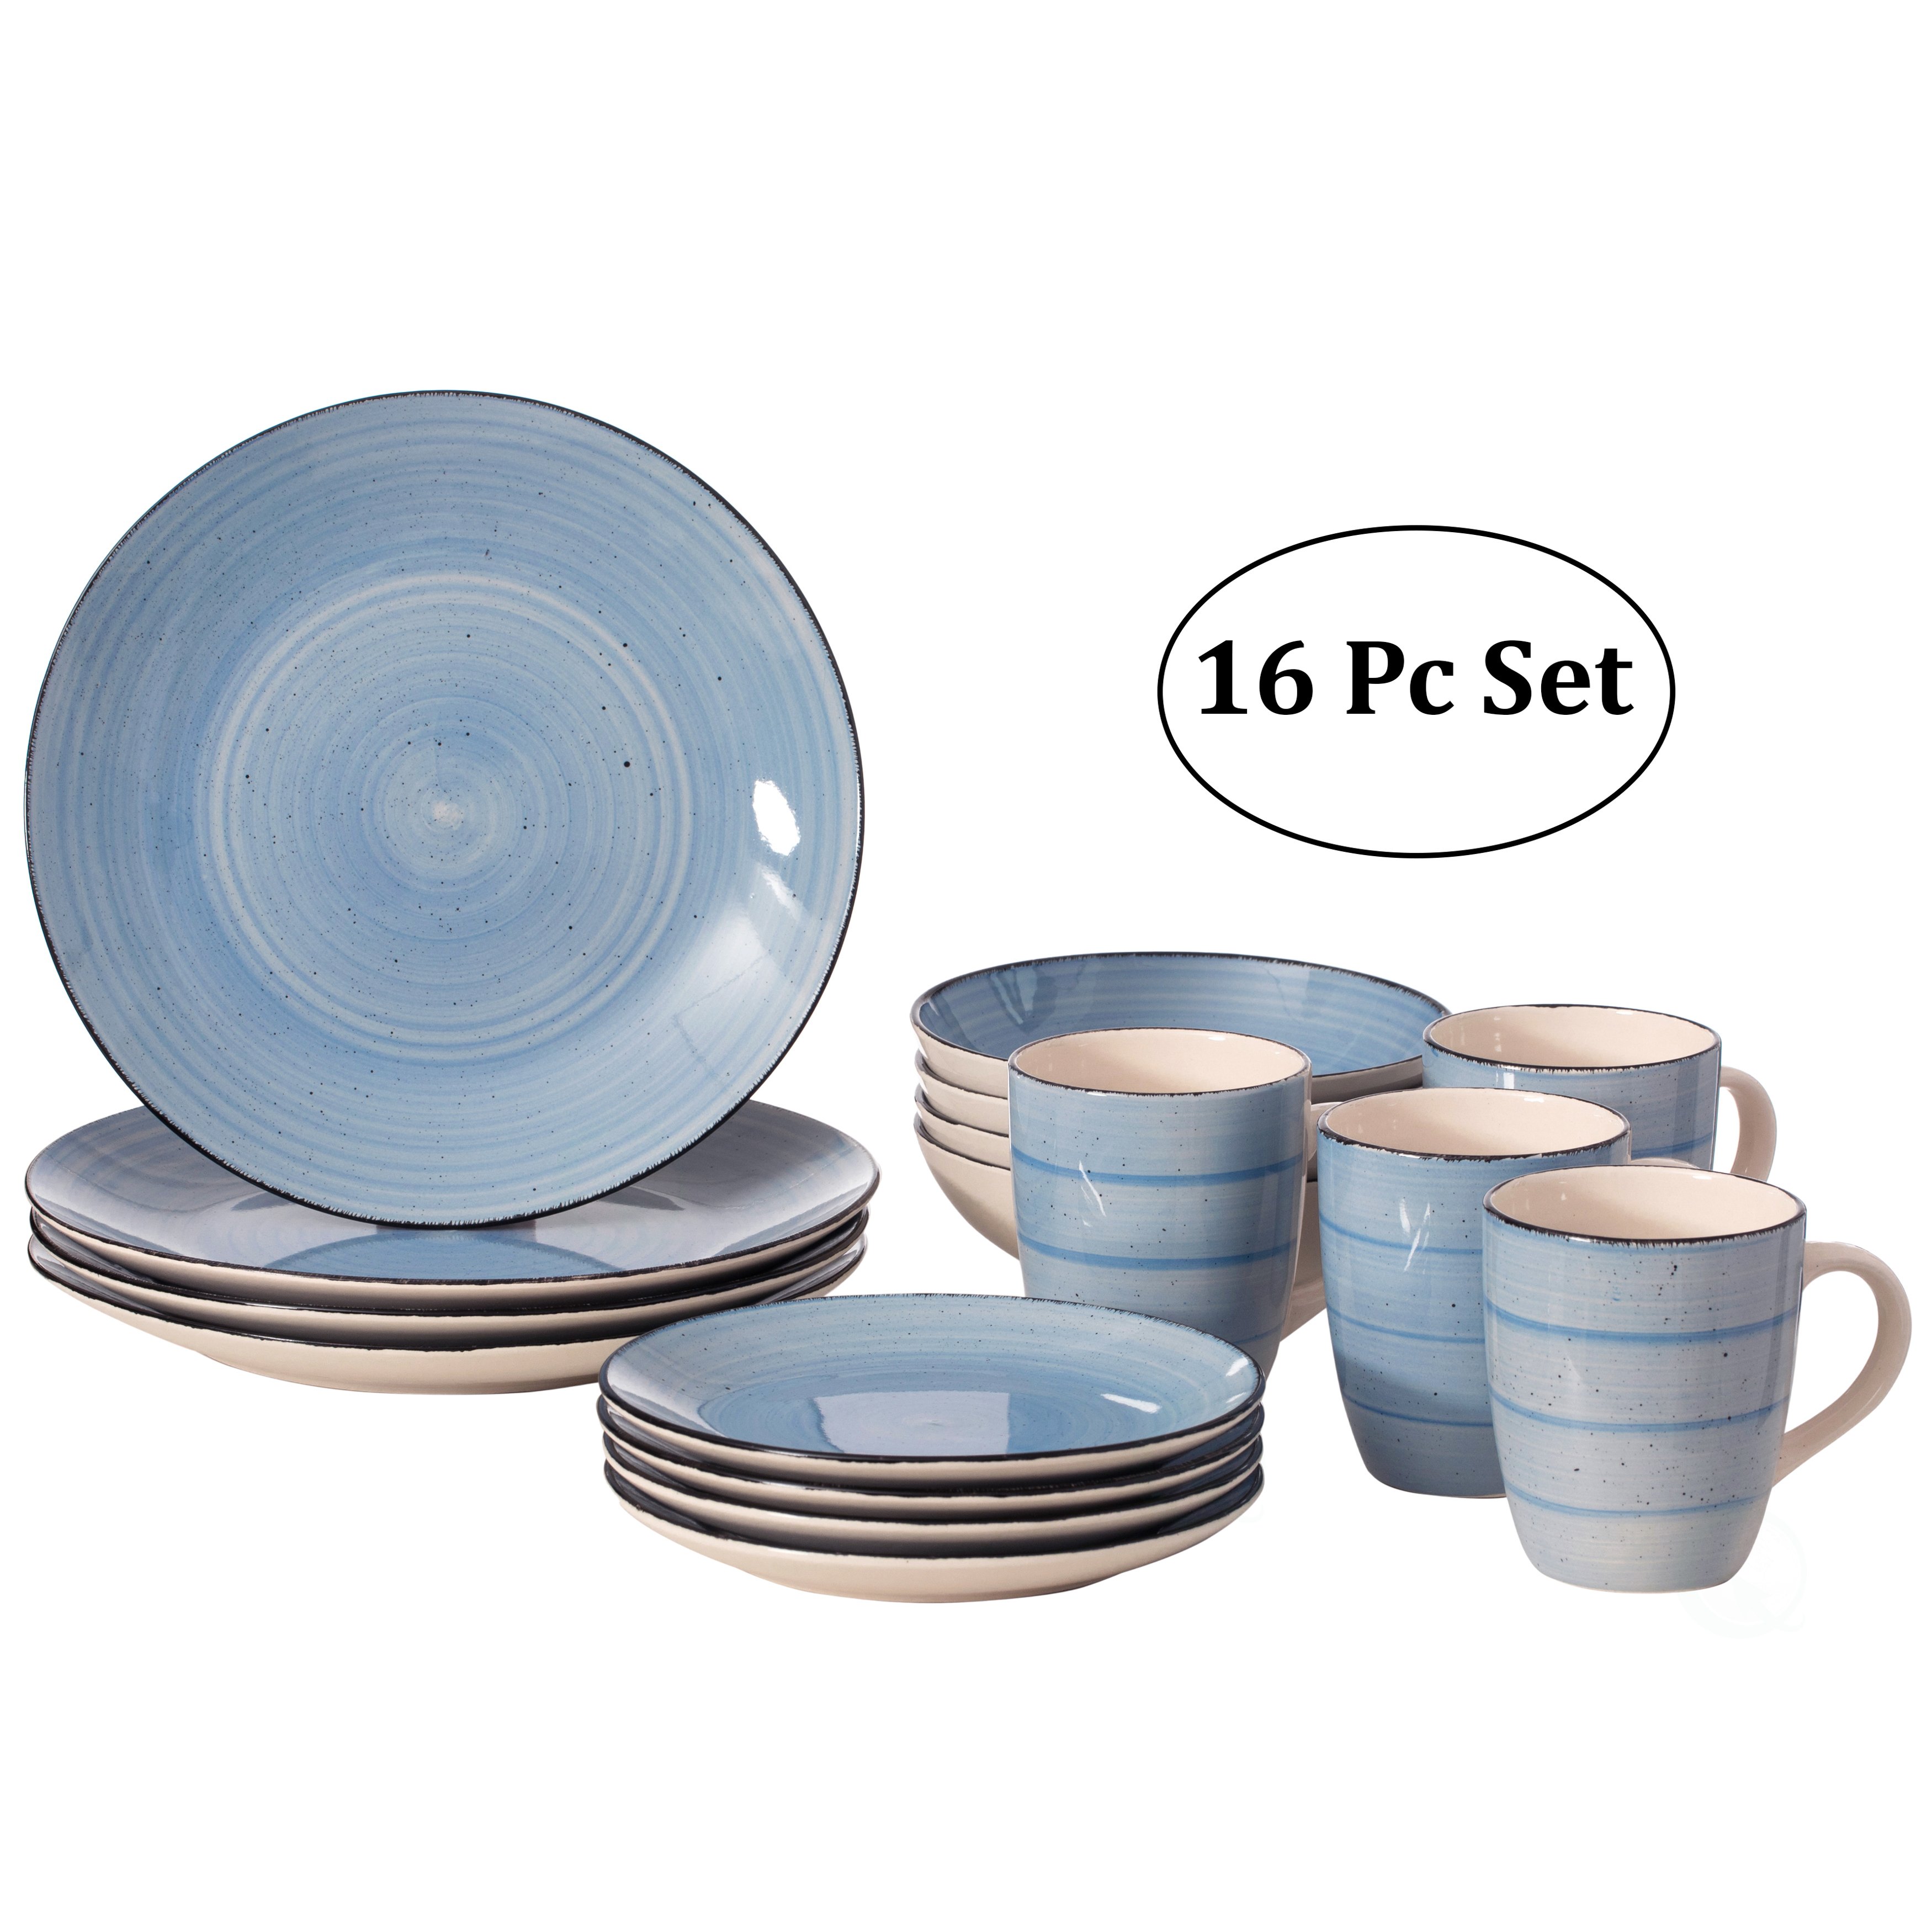 16 PC Spin Wash Dinnerware Dish Set for 4 Person Mugs, Salad and Dinner Plates and Bowls Sets, Dishwasher and Microwave Safe - Blue